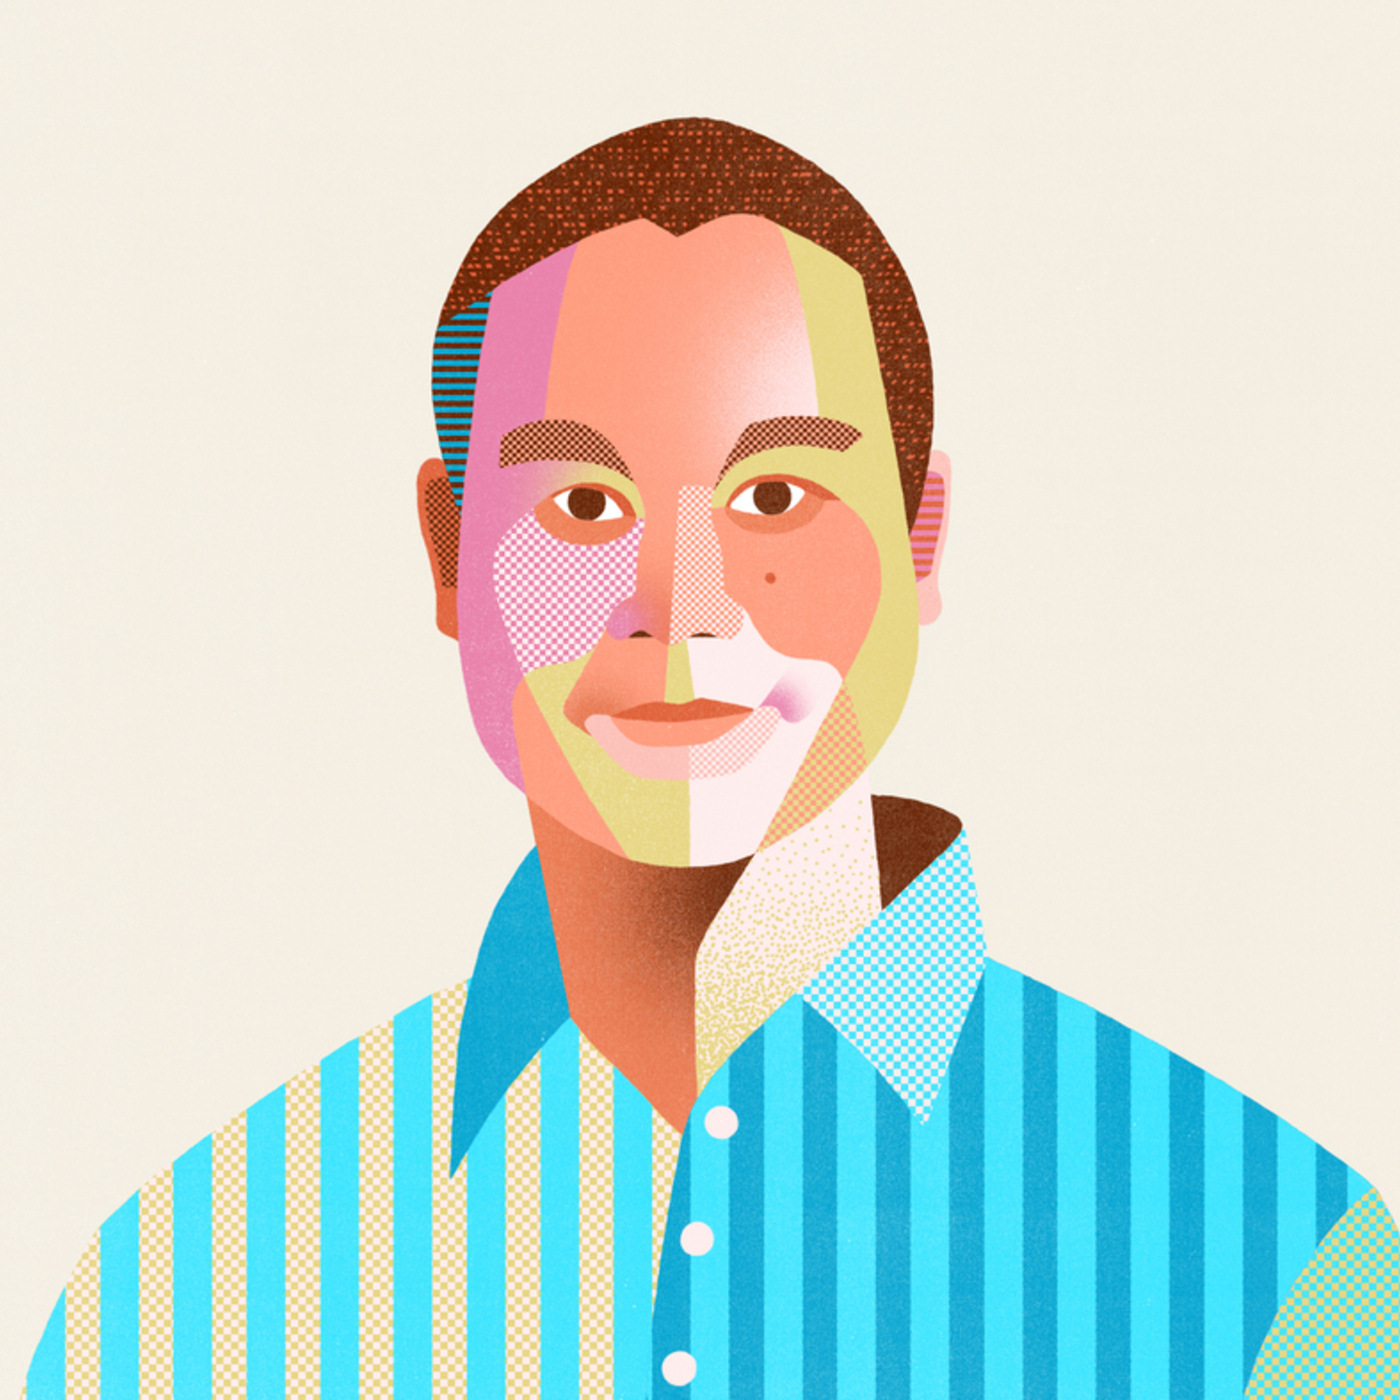 Remembering Tony Hsieh of Zappos